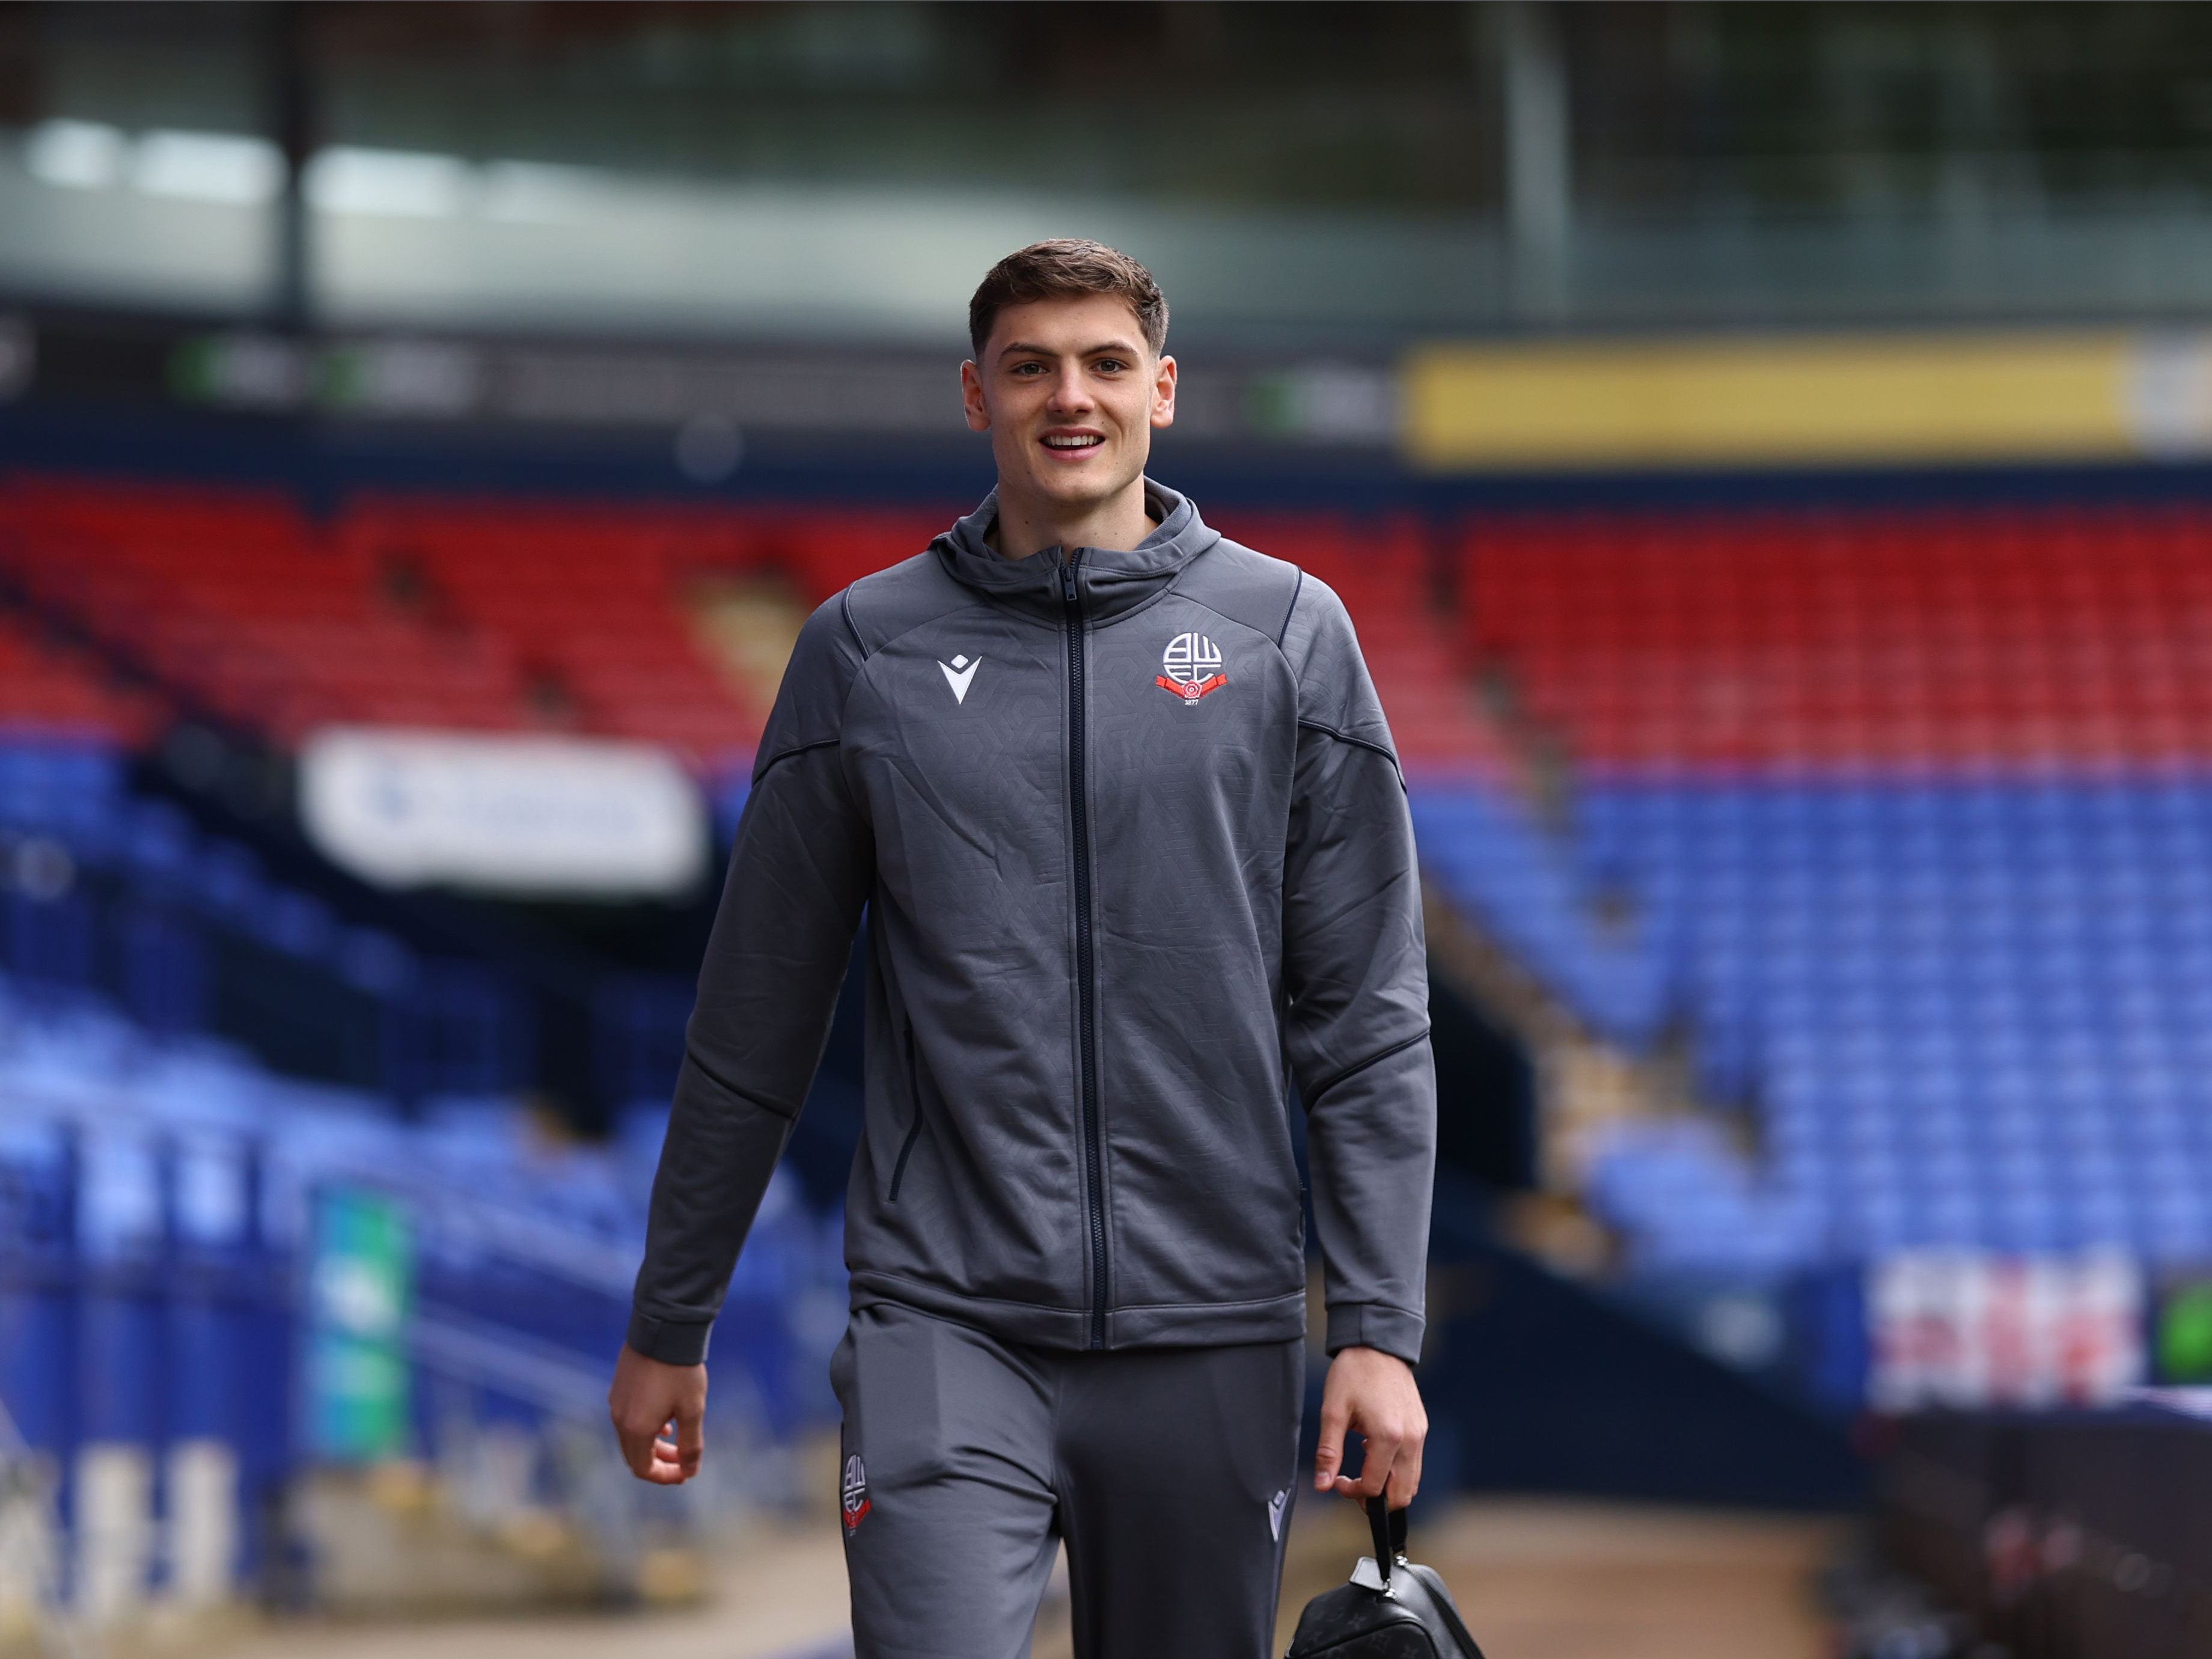 A photo of Caleb Taylor arriving at the Toughest Community Stadium, wearing loan club Bolton Wanderers' tracksuit wear